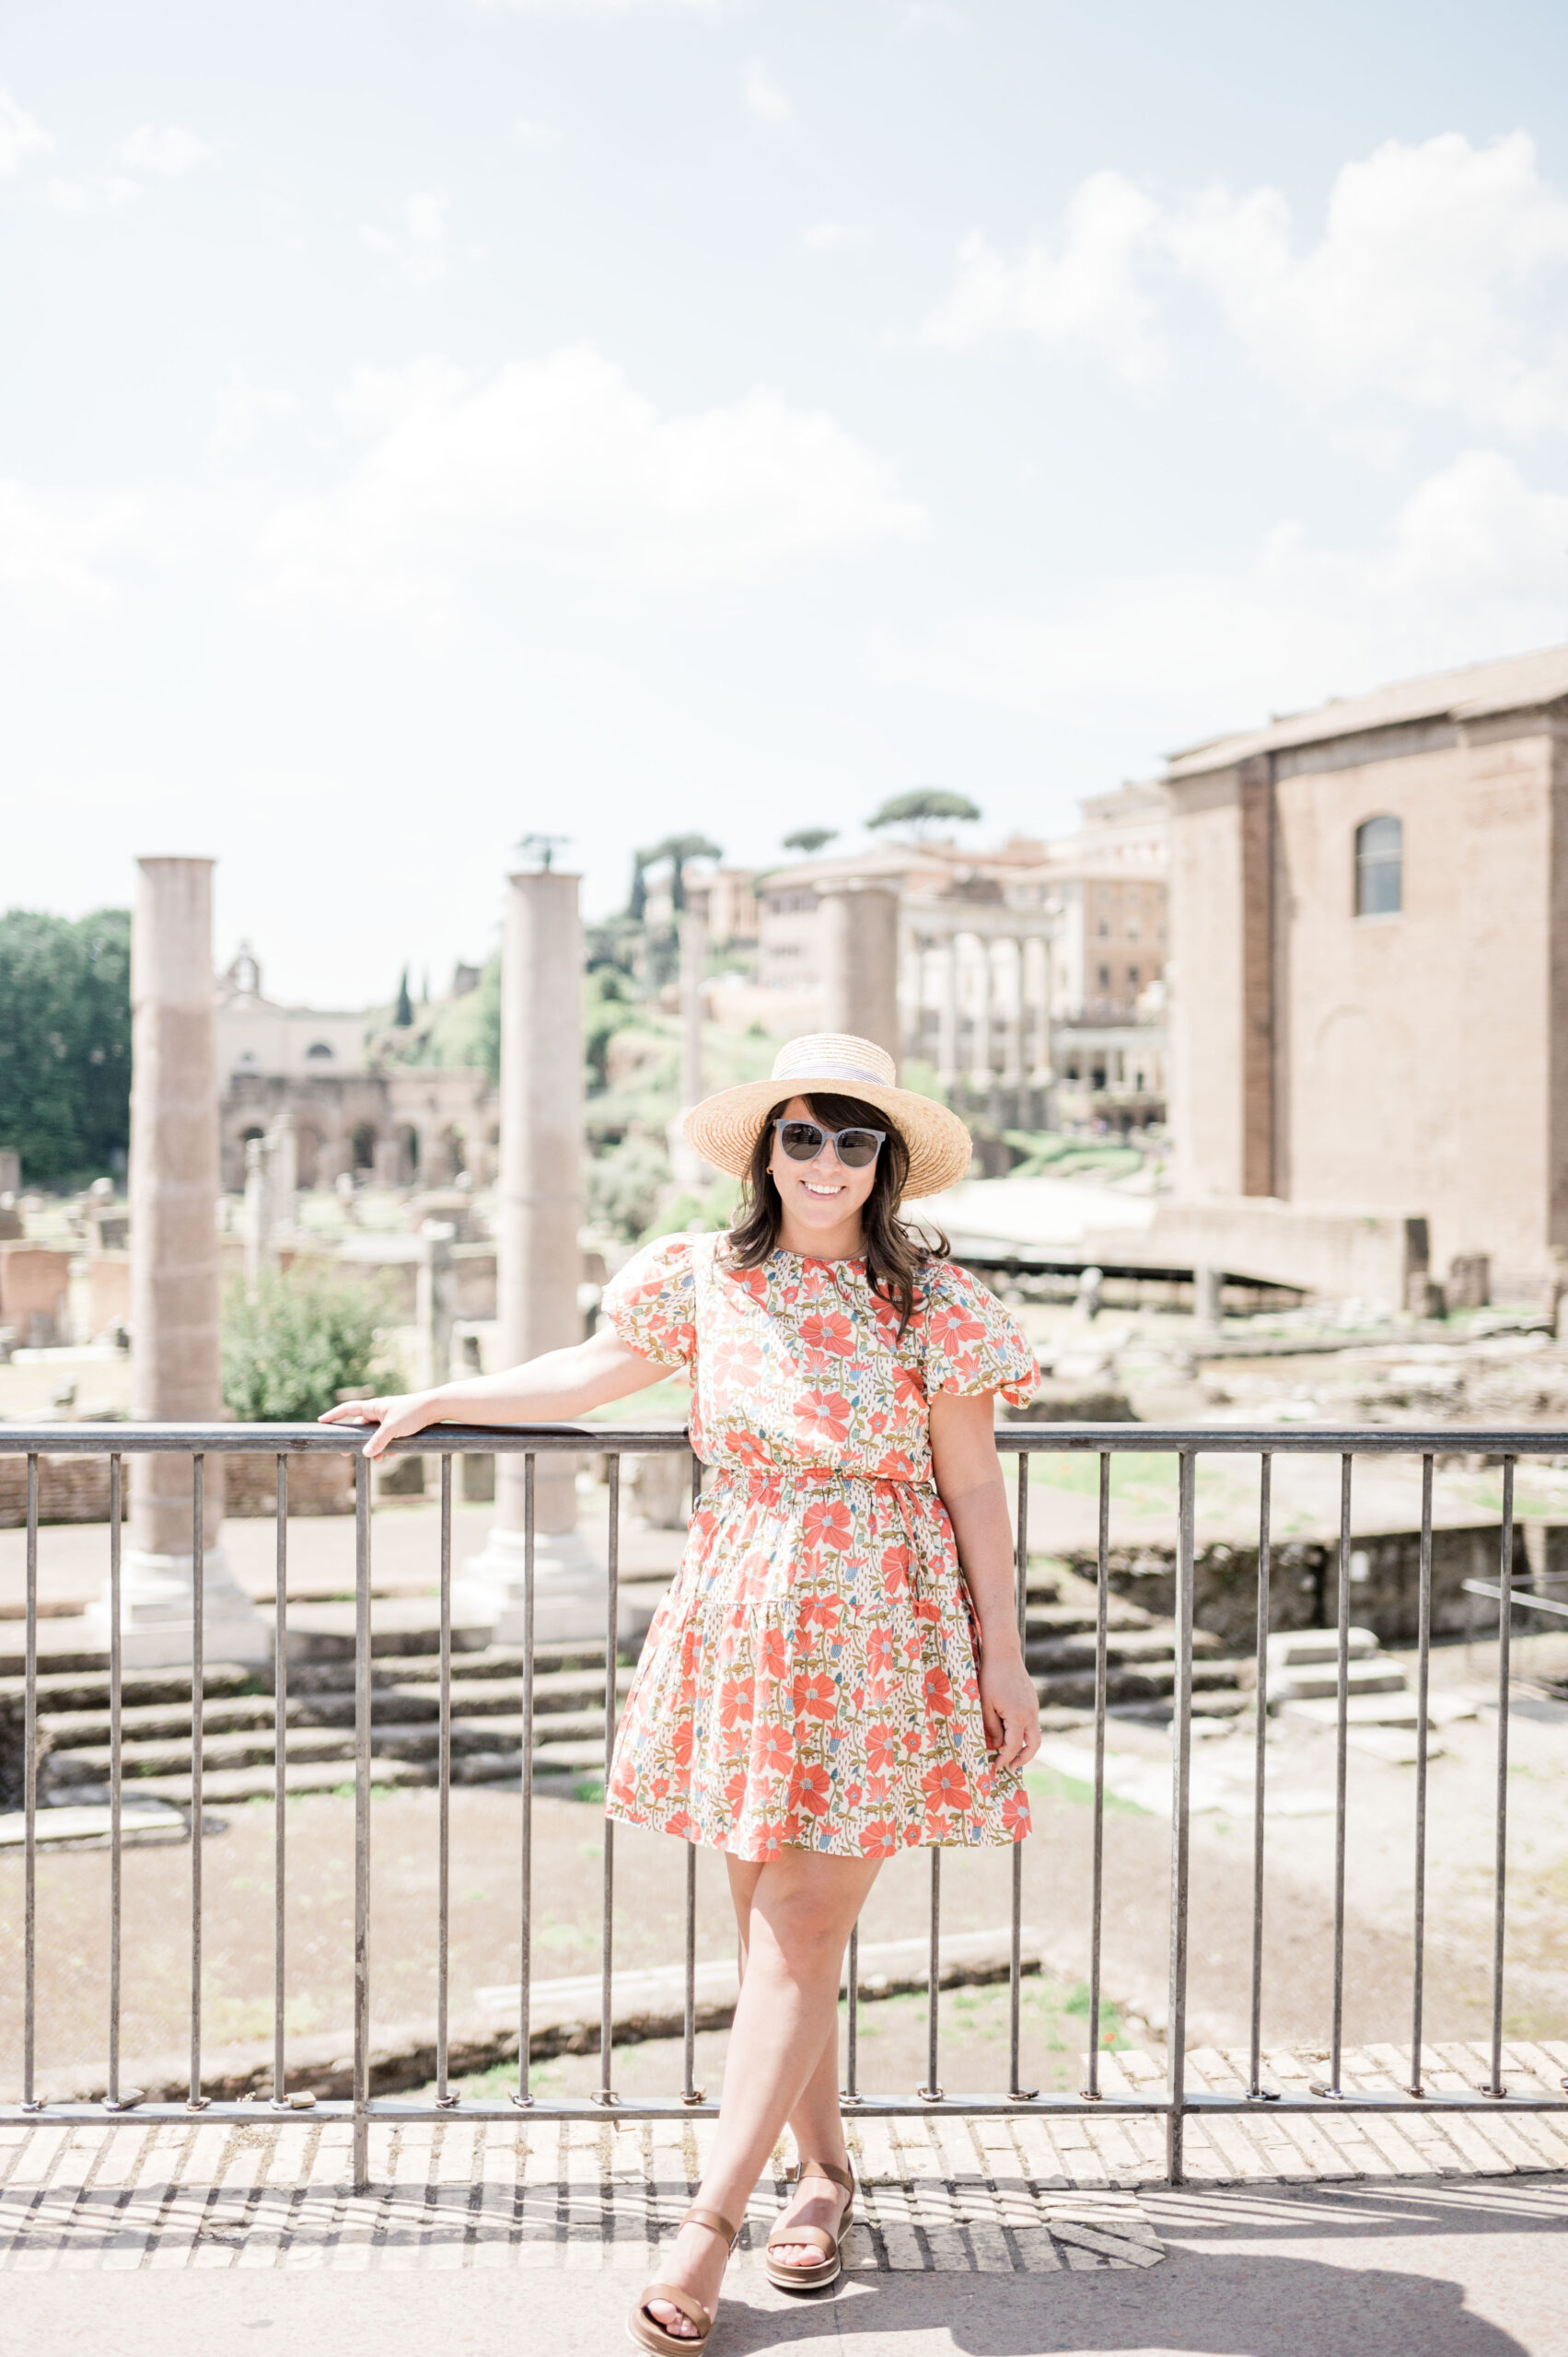 Brittney Naylor standing in front of the Roman Forum. She is wearing a red floral dress, sandals, and sun hat. 36 hours in Rome.